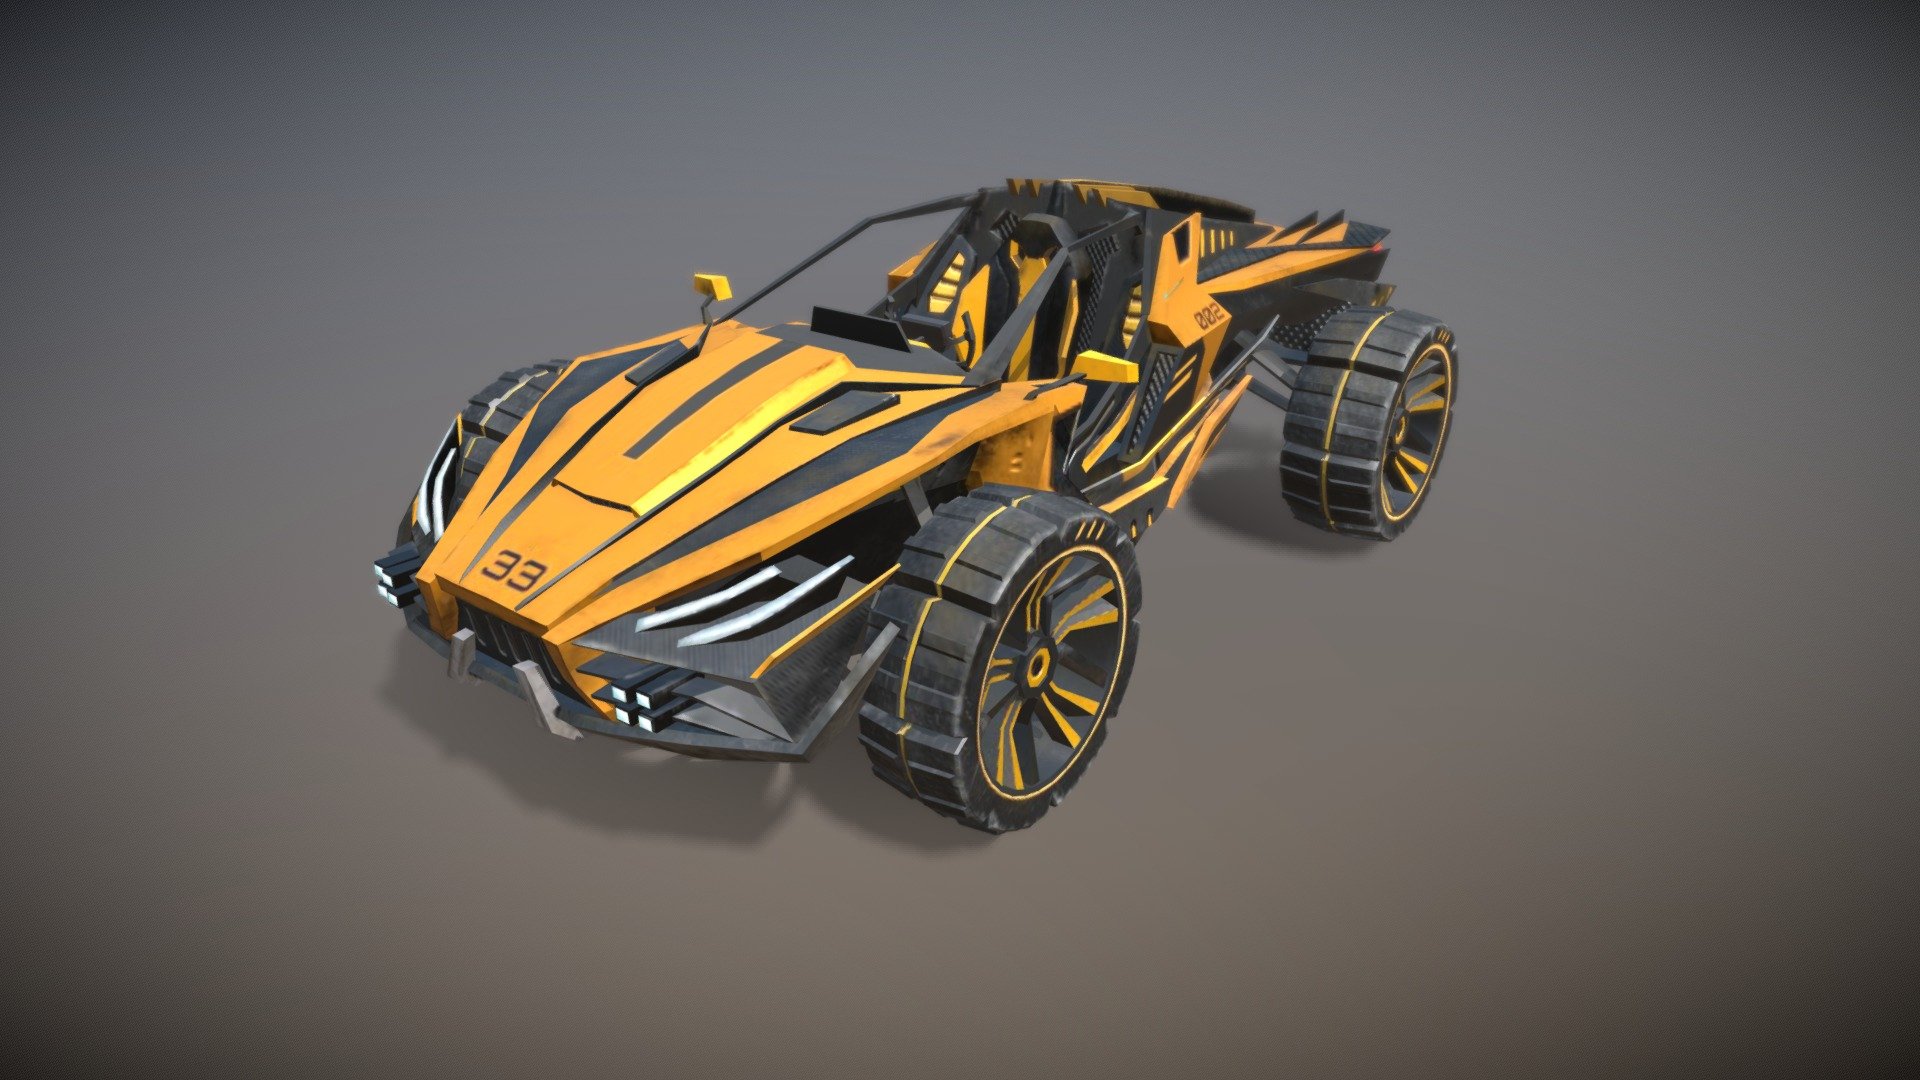 low poly racing buggy prepared for VR and mobile games

https://www.artstation.com/mlucio5d - Racing Buggy game asset - 3D model by mlucio5d 3d model